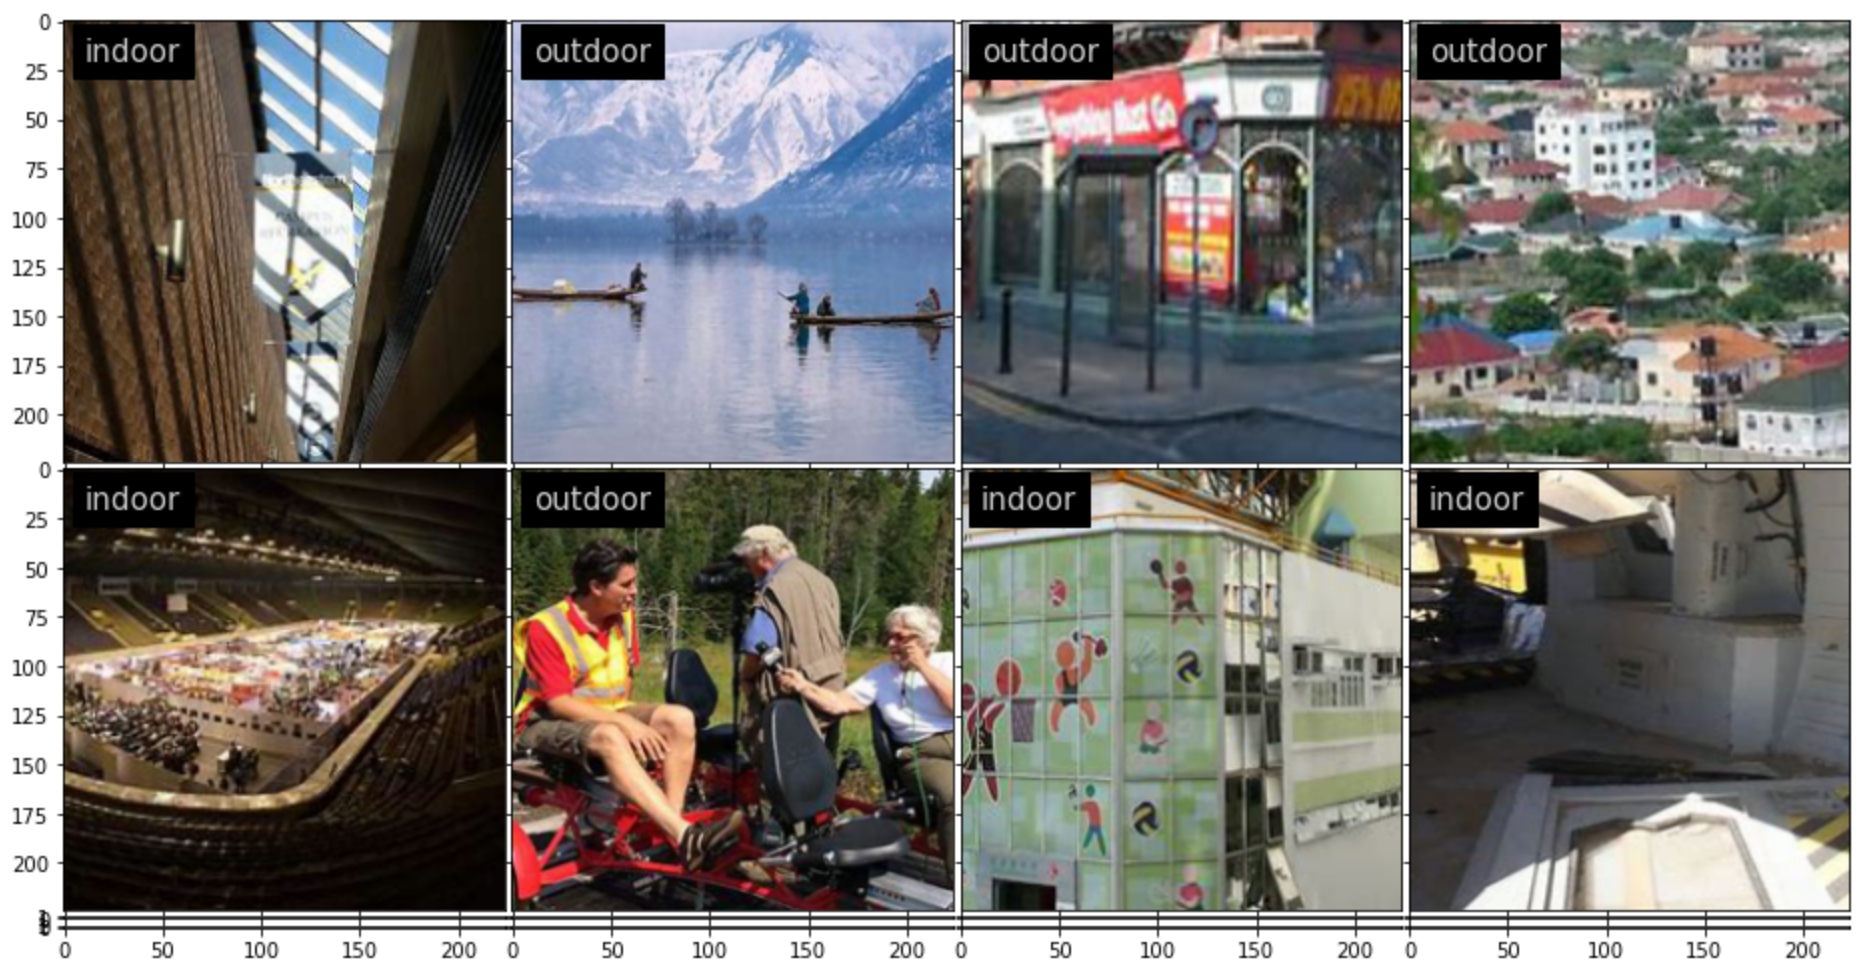 Training images for indoor and outdoor scene. By visualizing these images with the ground truth labels, it enables the AI practitioners to quickly explore a sample of the image dataset, and understand the images that are used for training